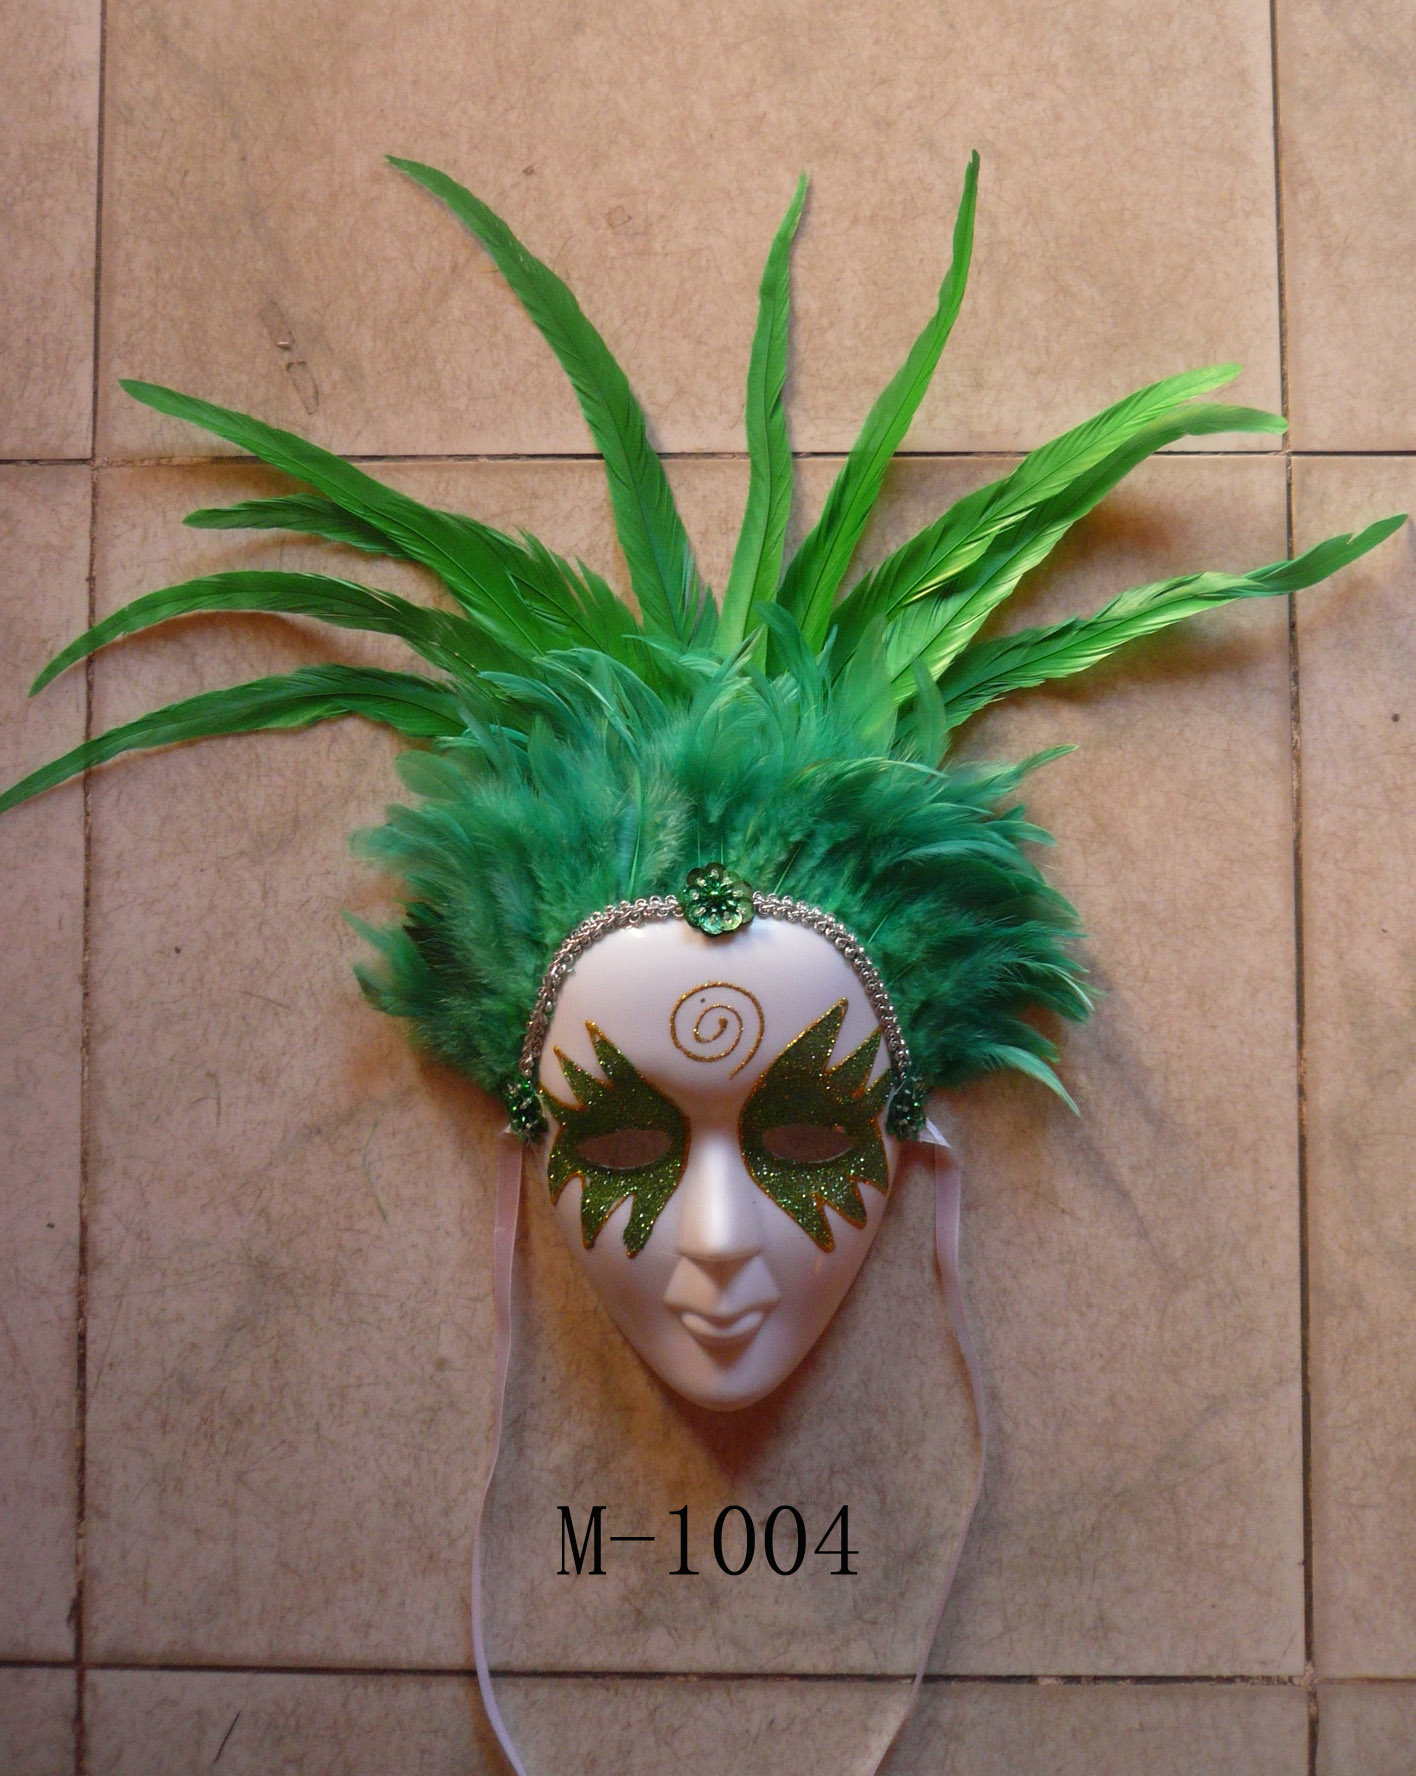 Cheap feather masks for sale - Made in China M-1004